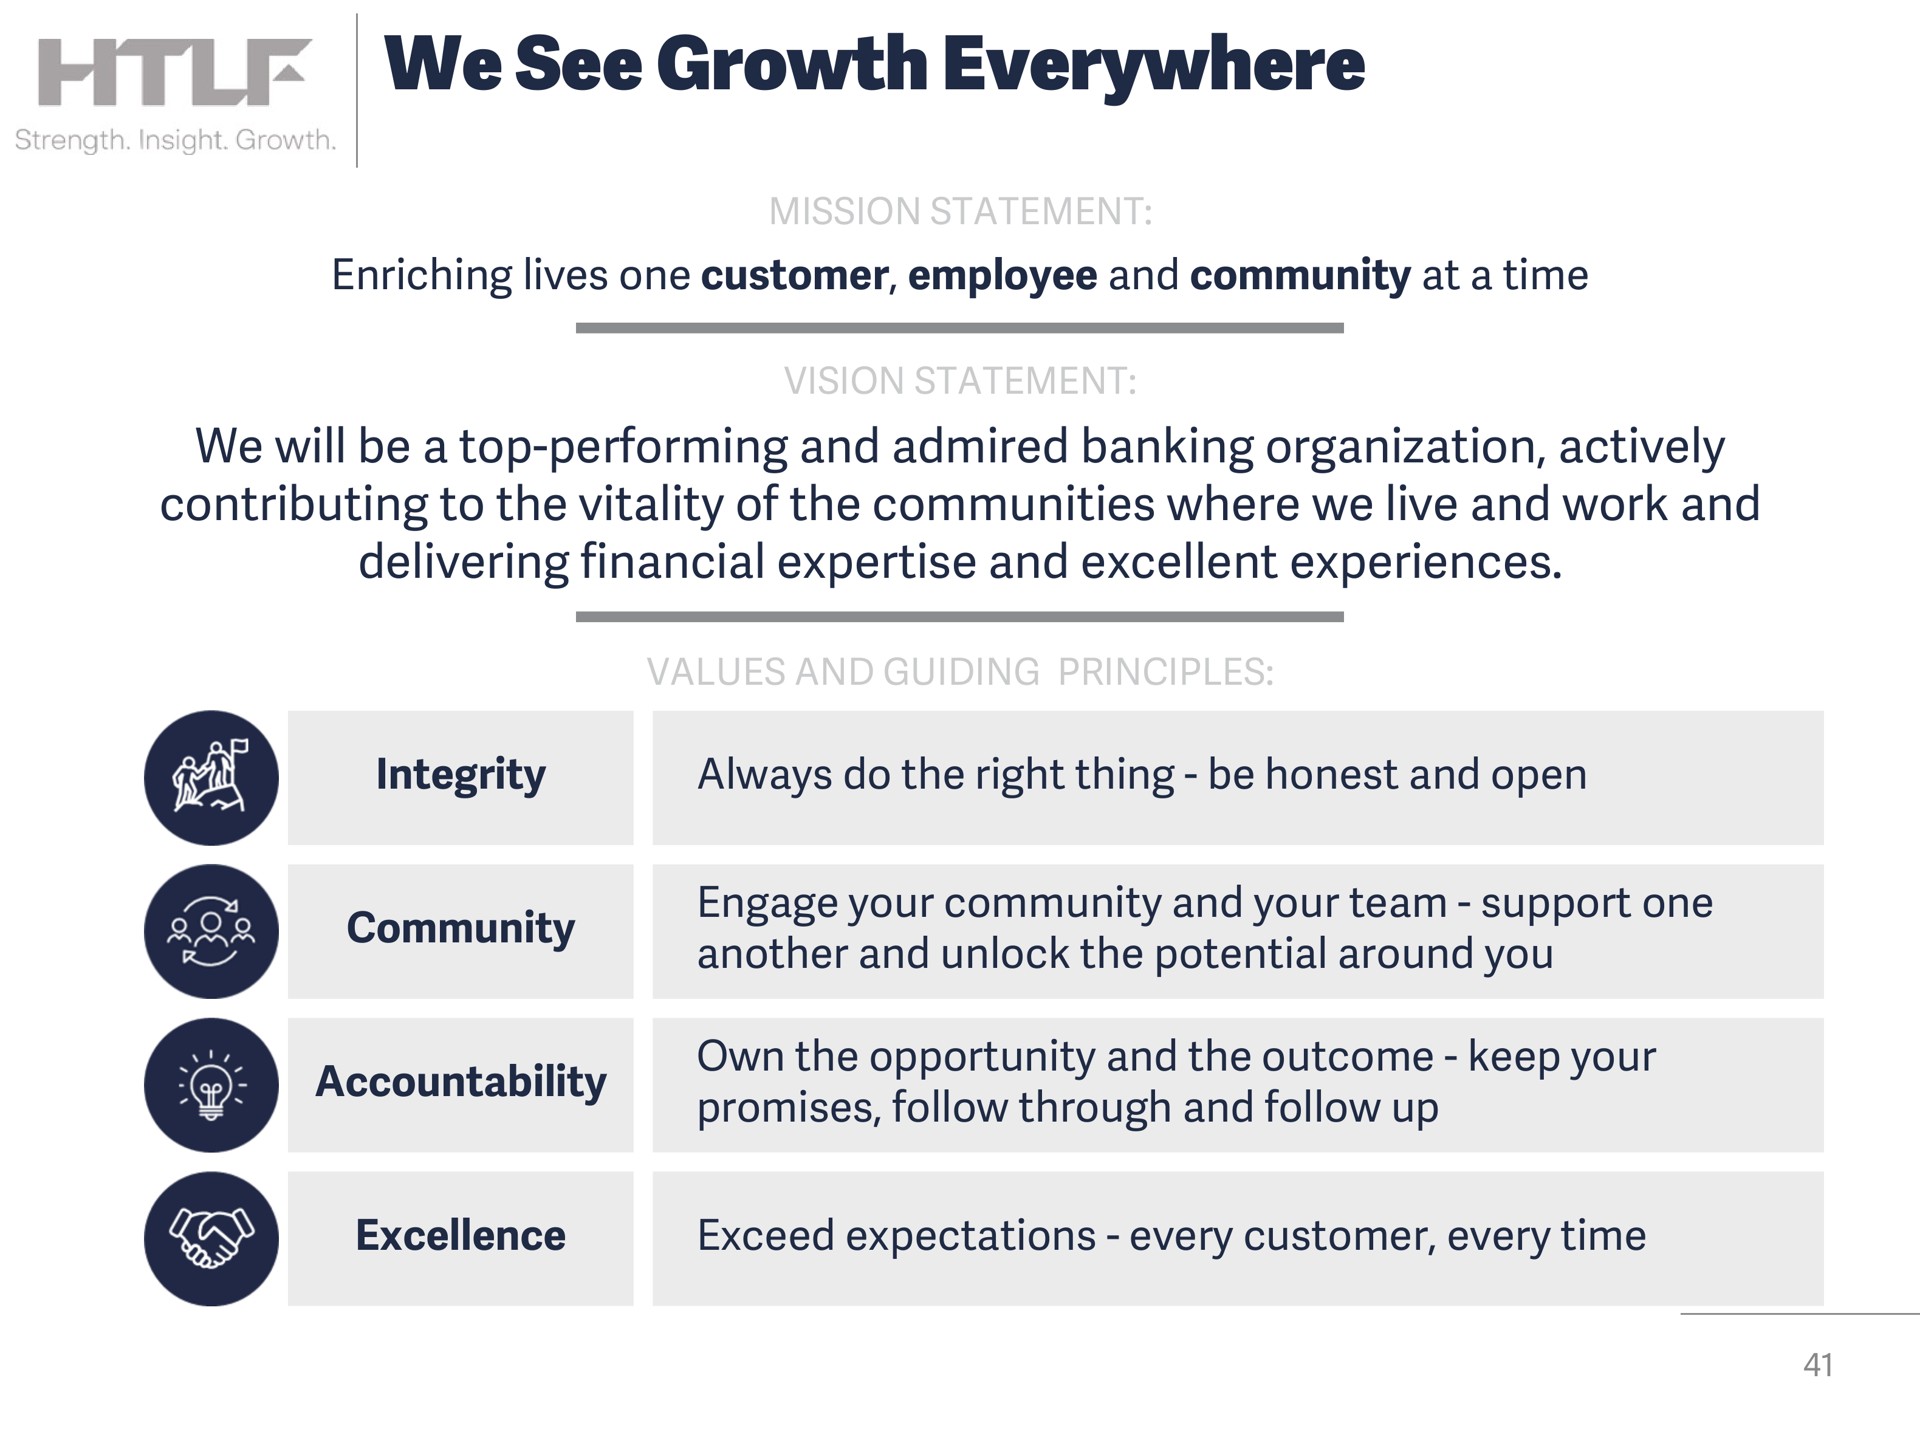 we see growth everywhere enriching lives one customer employee and community at a time we will be a top performing and admired banking organization actively contributing to the vitality of the communities where we live and work and delivering financial and excellent experiences integrity always do the right thing be honest and open community engage your community and your team support one another and unlock the potential around you accountability own the opportunity and the outcome keep your promises follow through and follow up excellence exceed expectations every customer every time | Heartland Financial USA